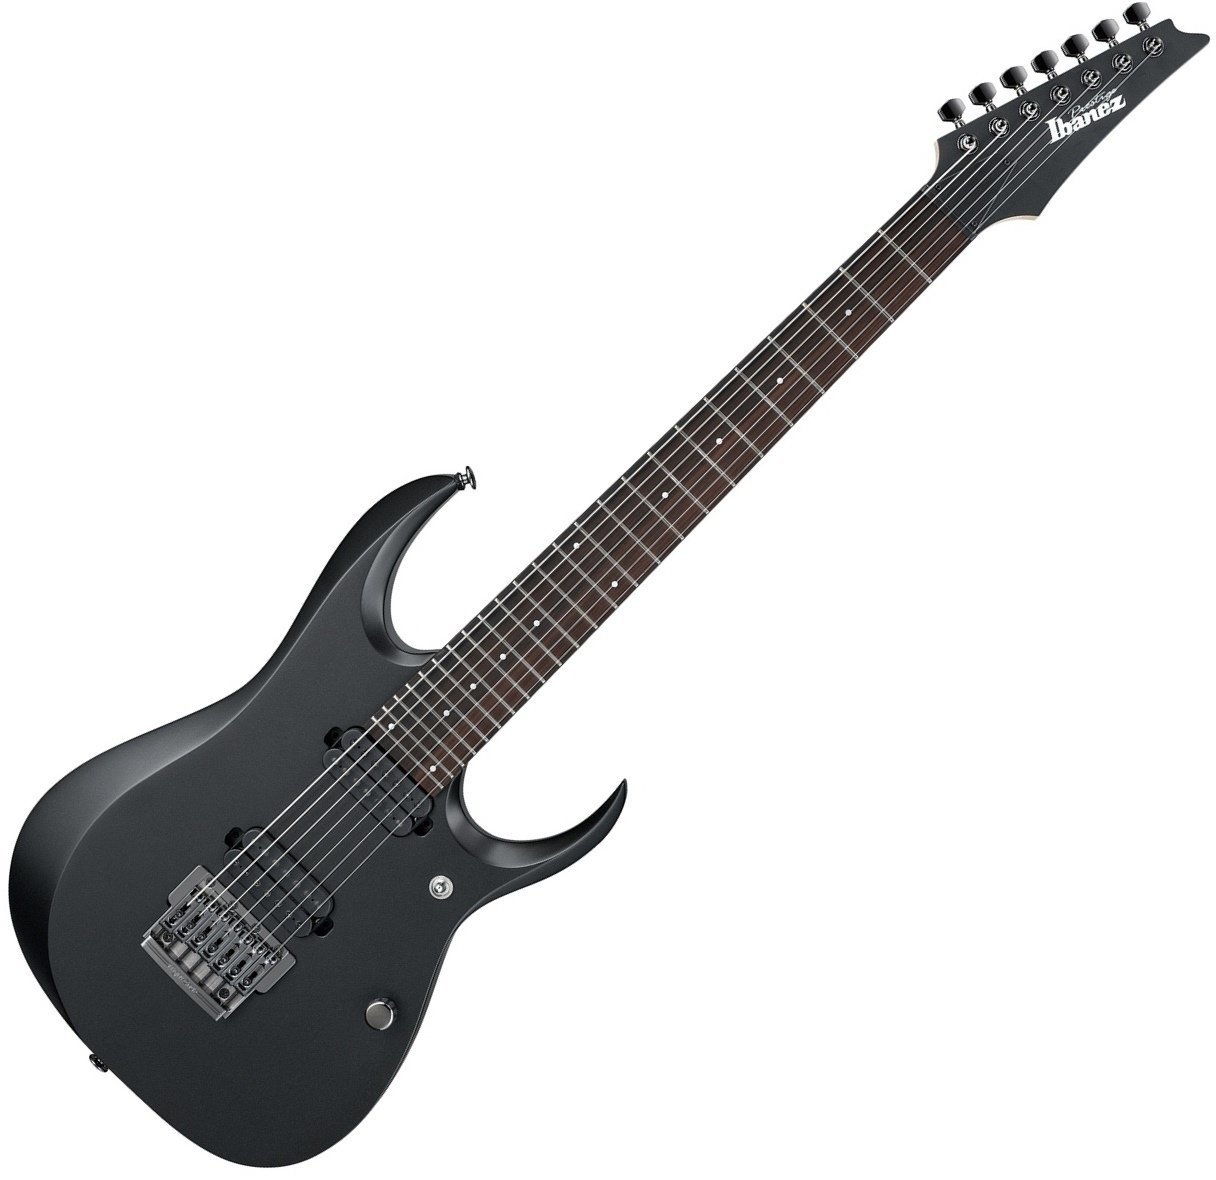 7-string Electric Guitar Ibanez RGD 2127FX Invisible Shadow